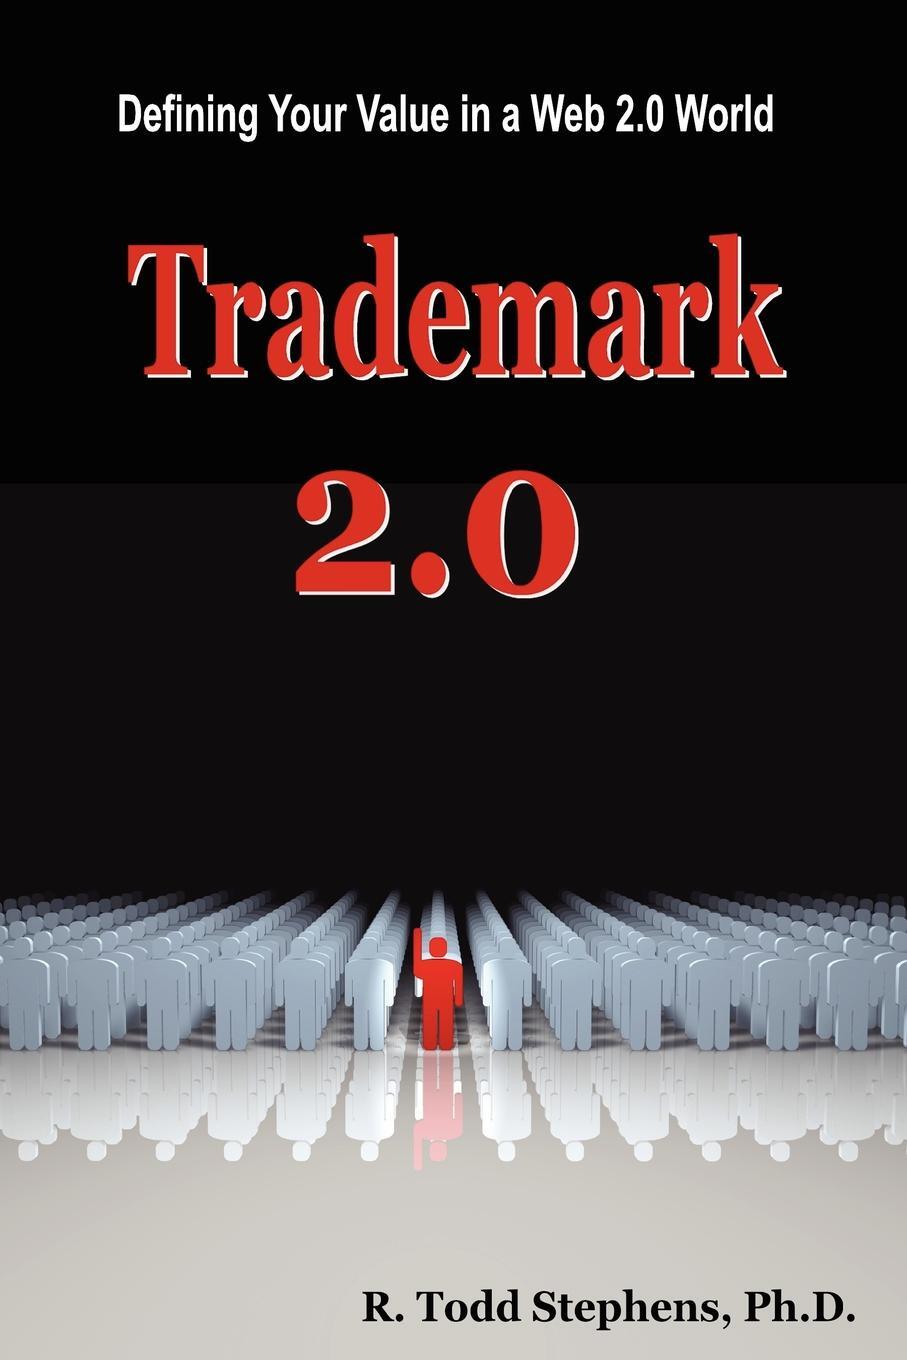 фото Trademark 2.0. Defining Your Value in the Web 2.0 World